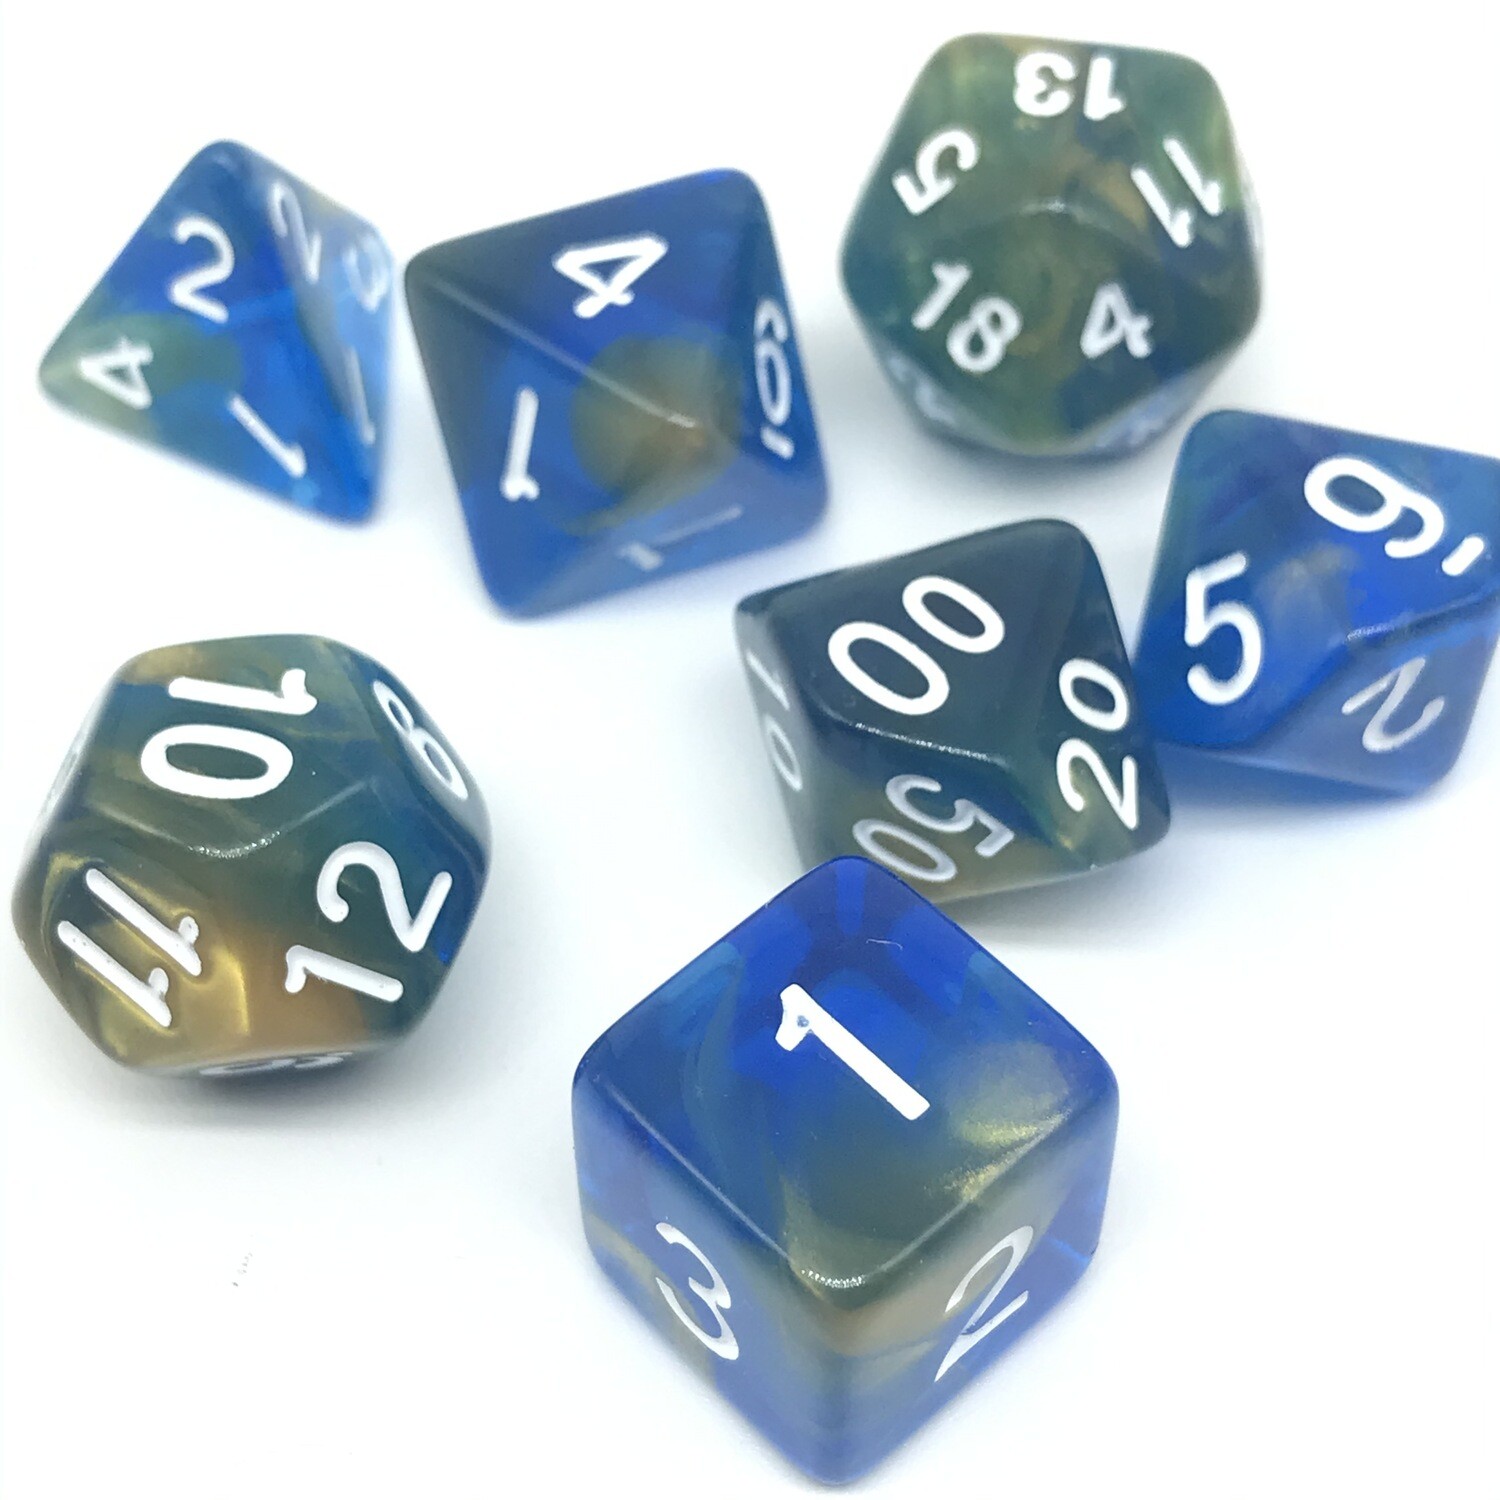 Dice Set - Blue transparent and yellow marbled with white numbers